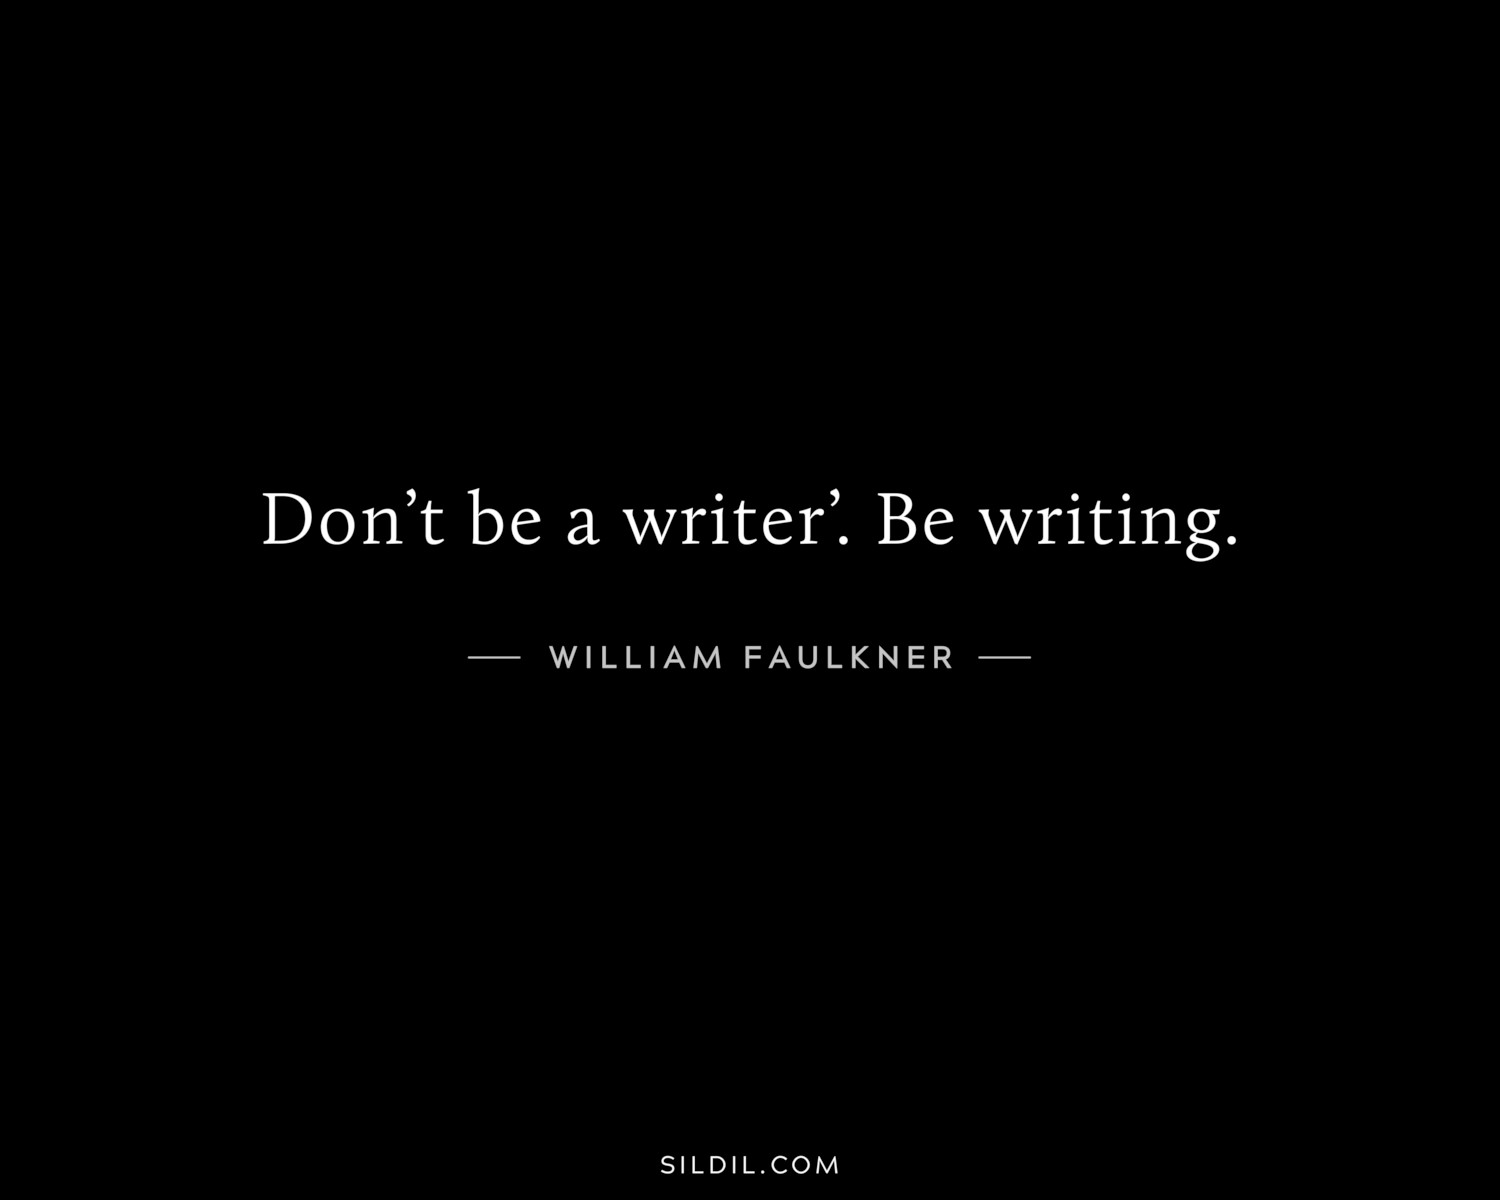 Don’t be a writer’. Be writing.